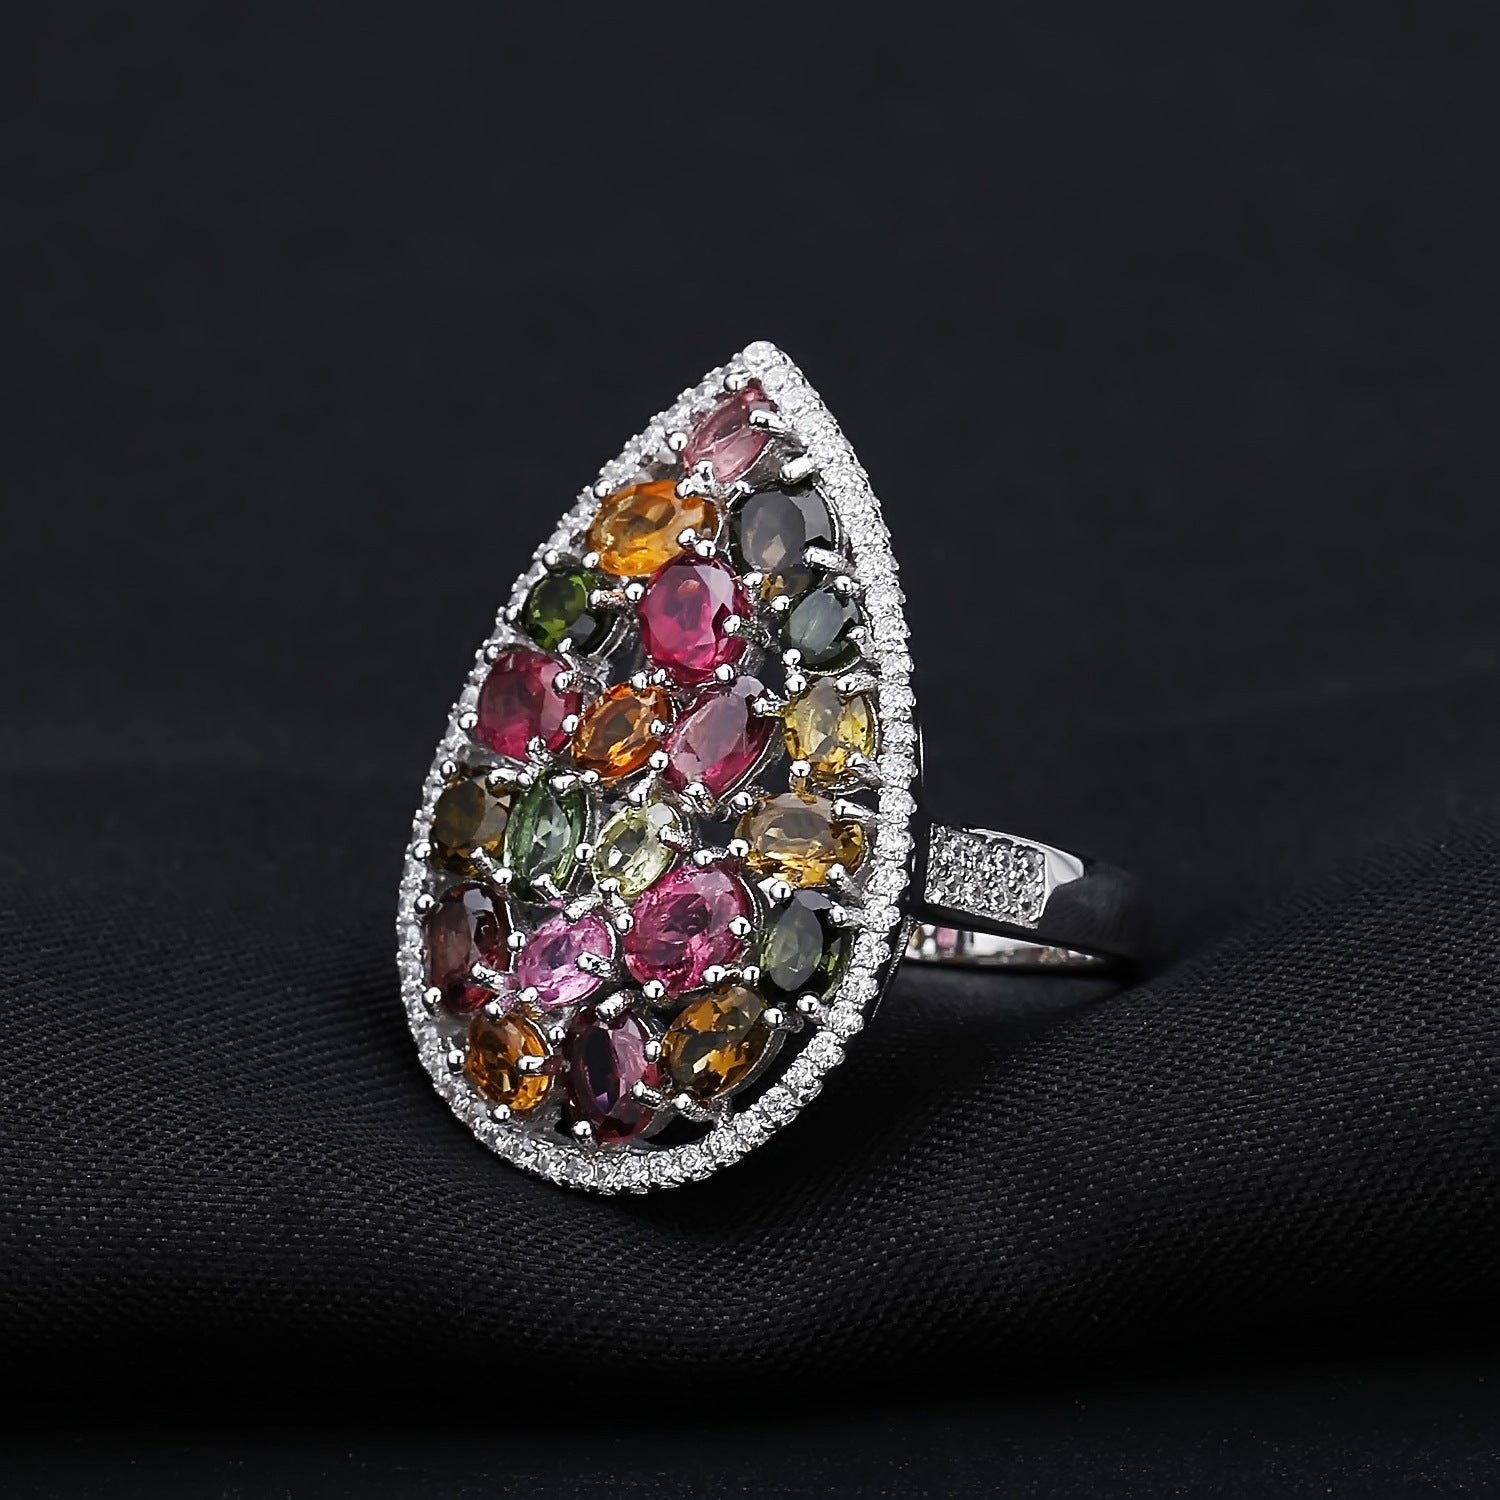 Vintage Luxury Natural Tourmaline Colourful Gemstone Silver Ring for Women